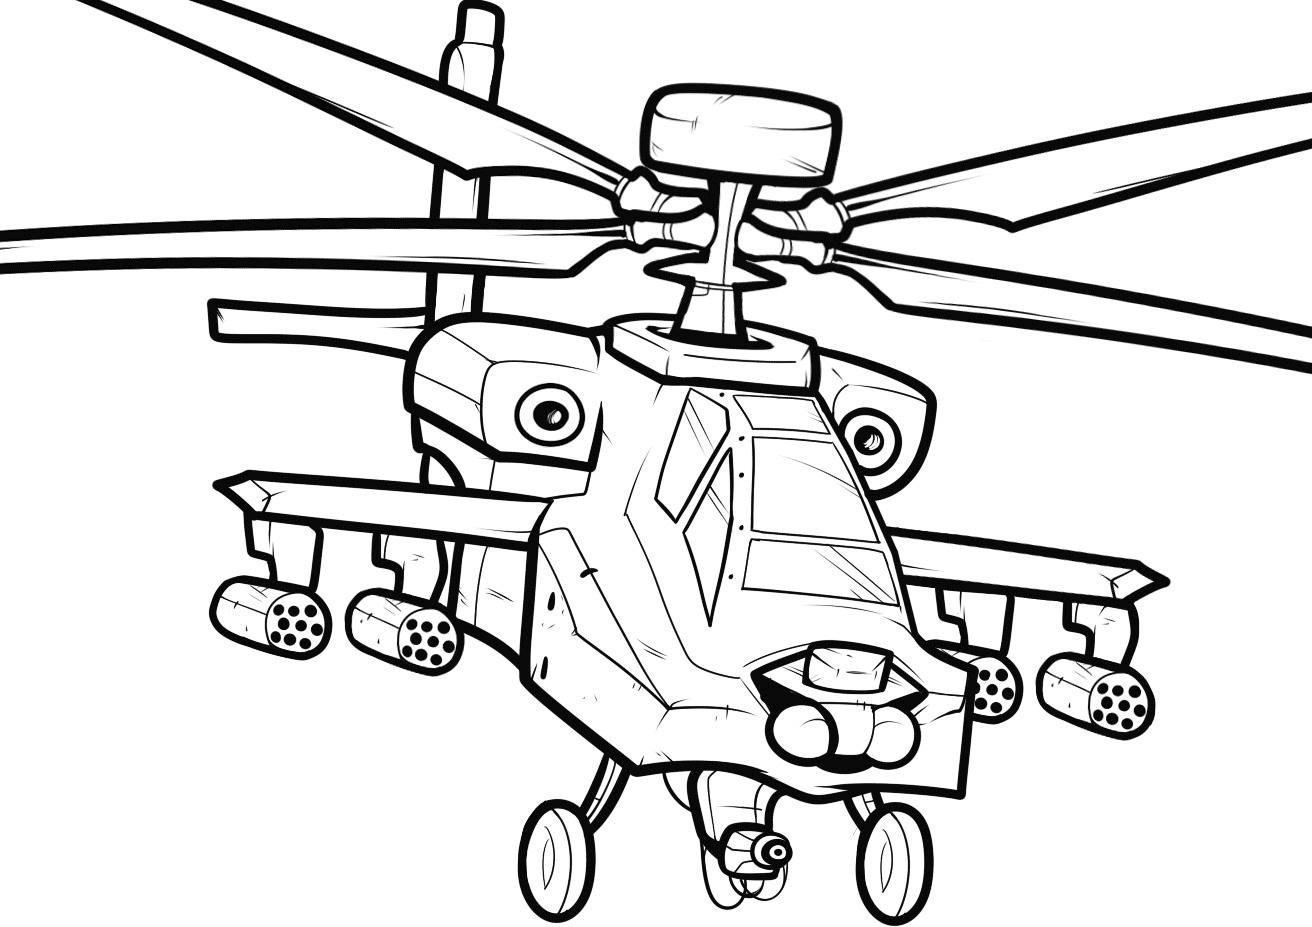 printable-army-helicopter-coloring-pages-army-military